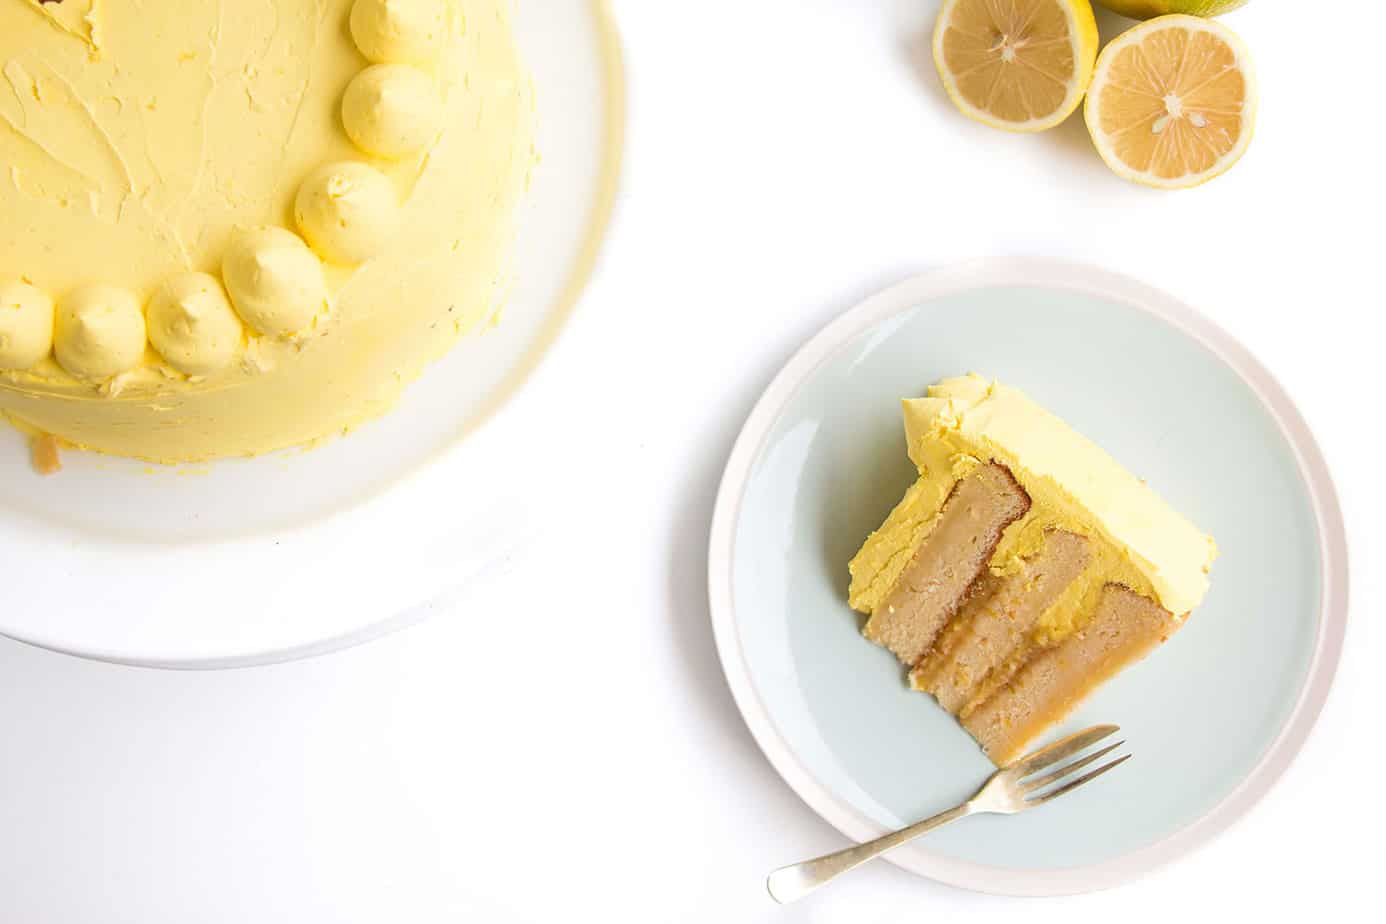 A slice of layered cake with yellow frosting.